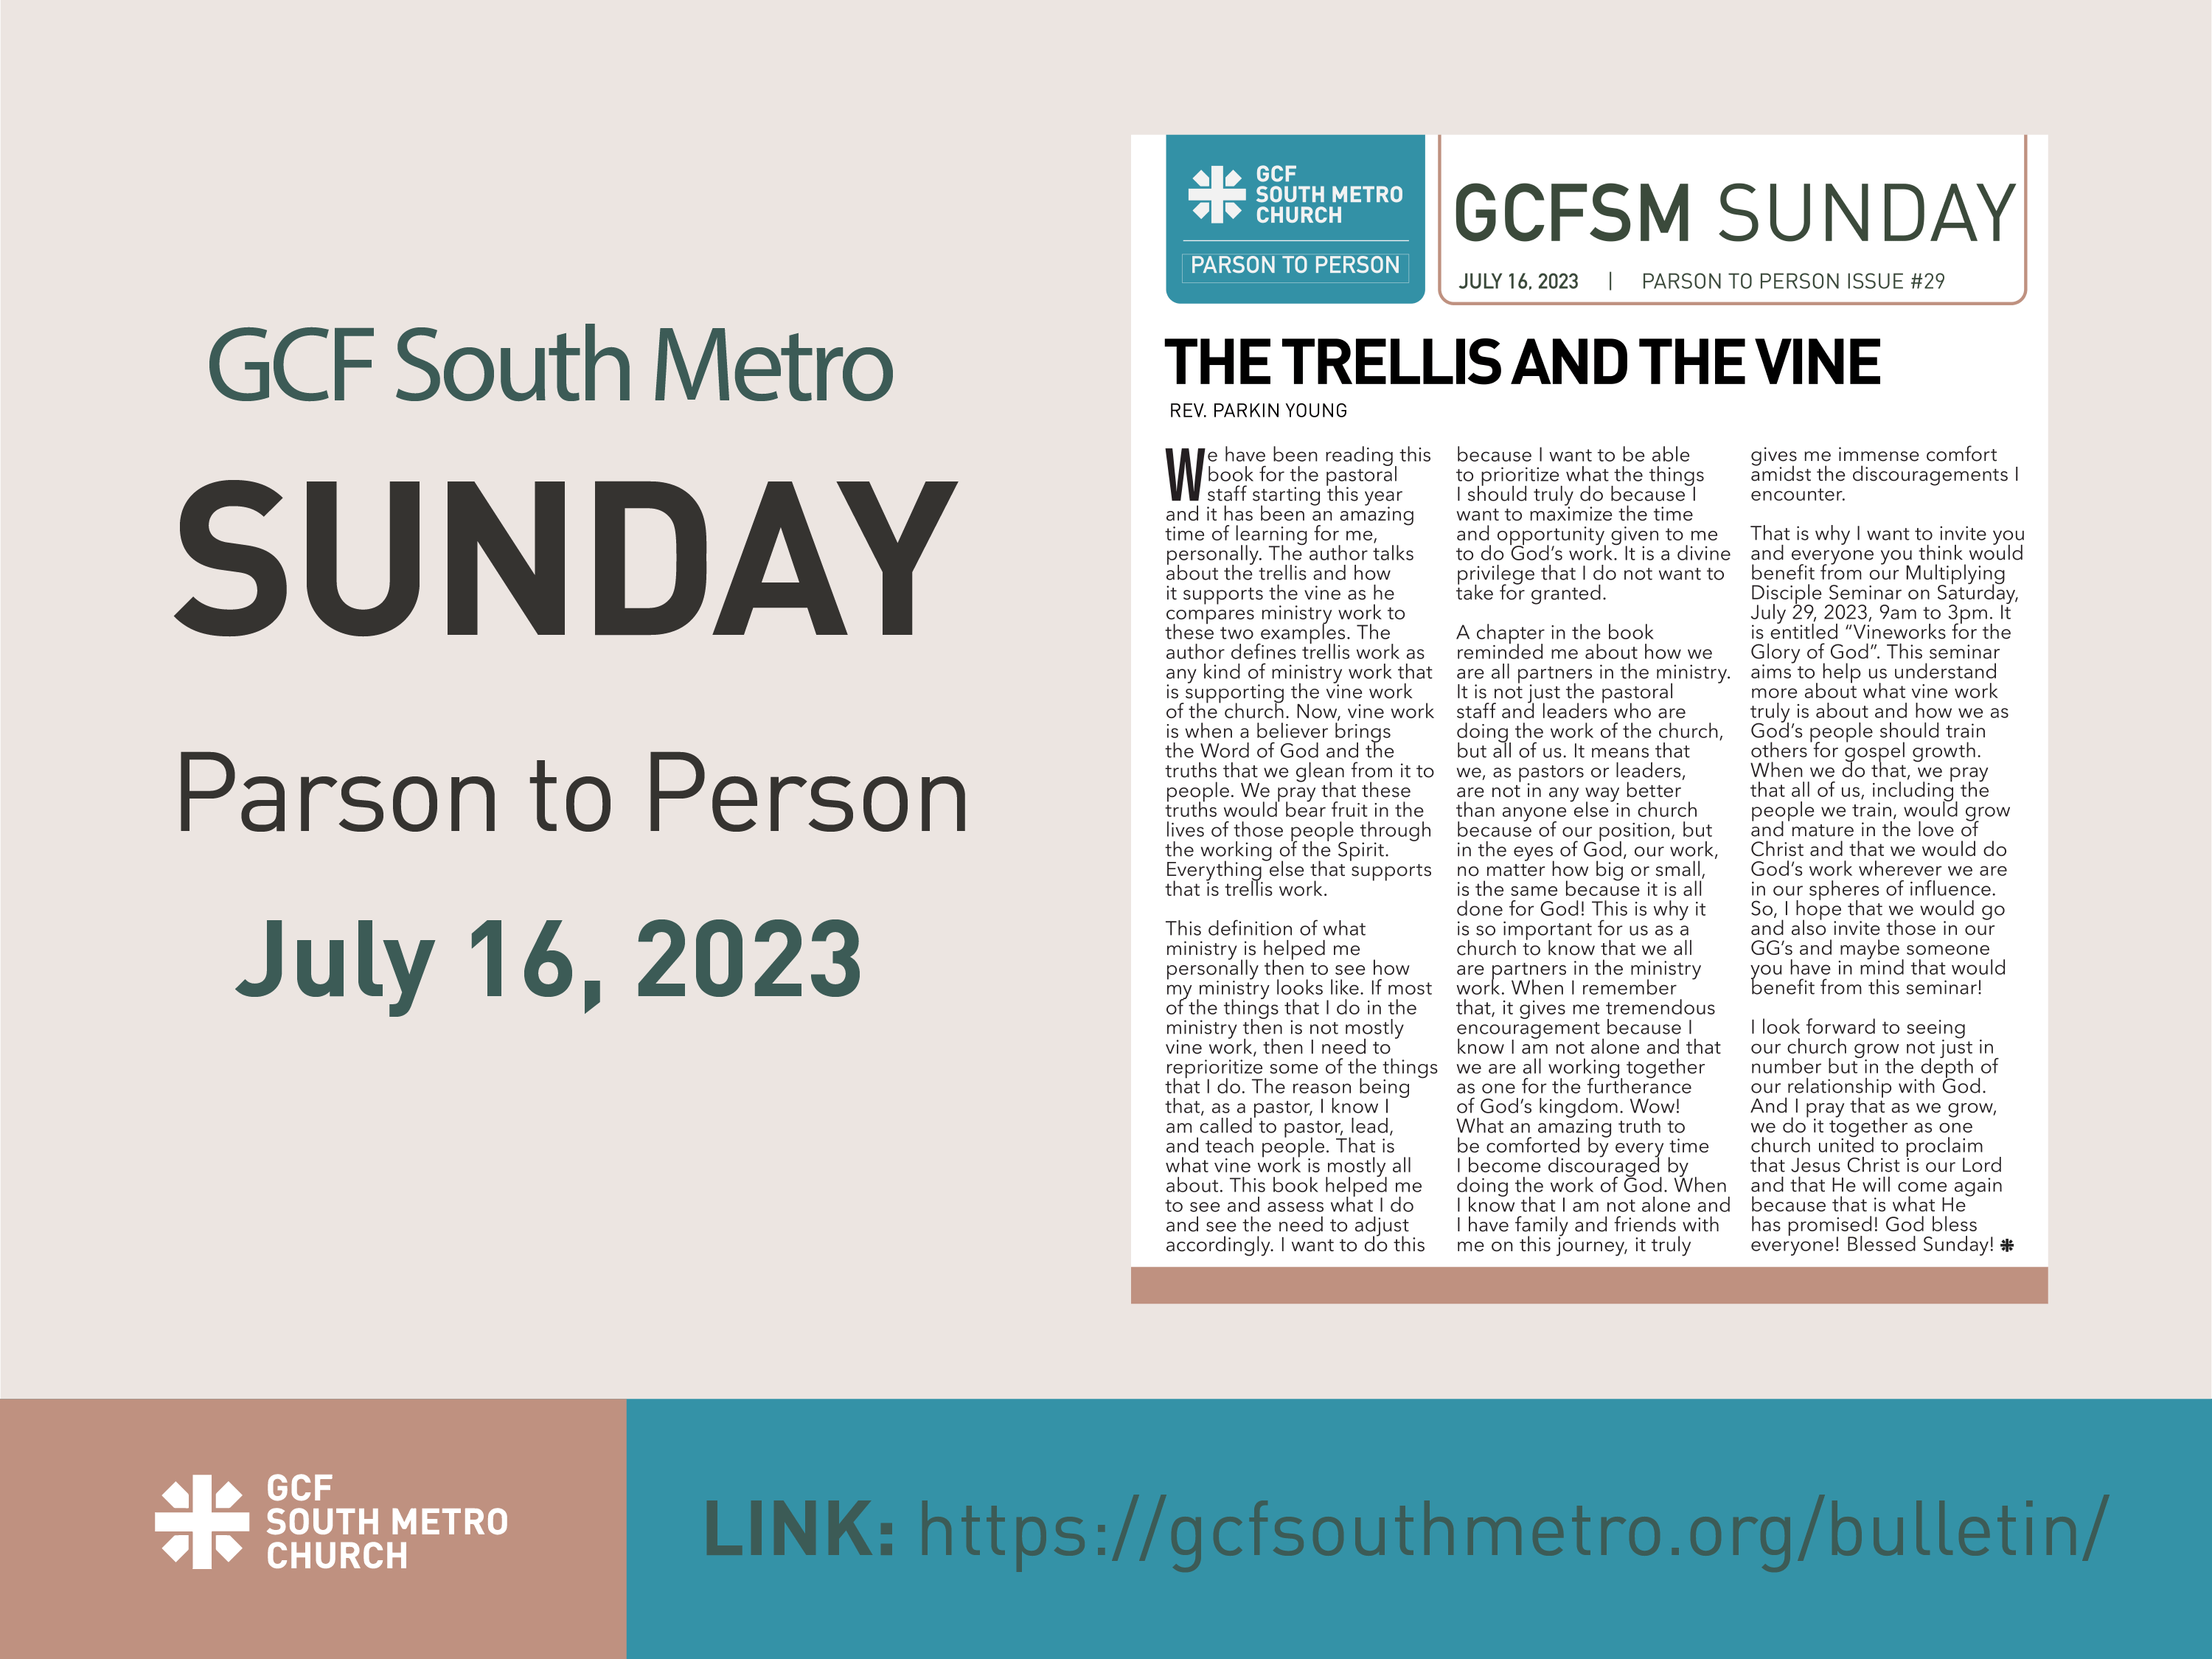 Sunday Bulletin – Parson to Person, July 16, 2023